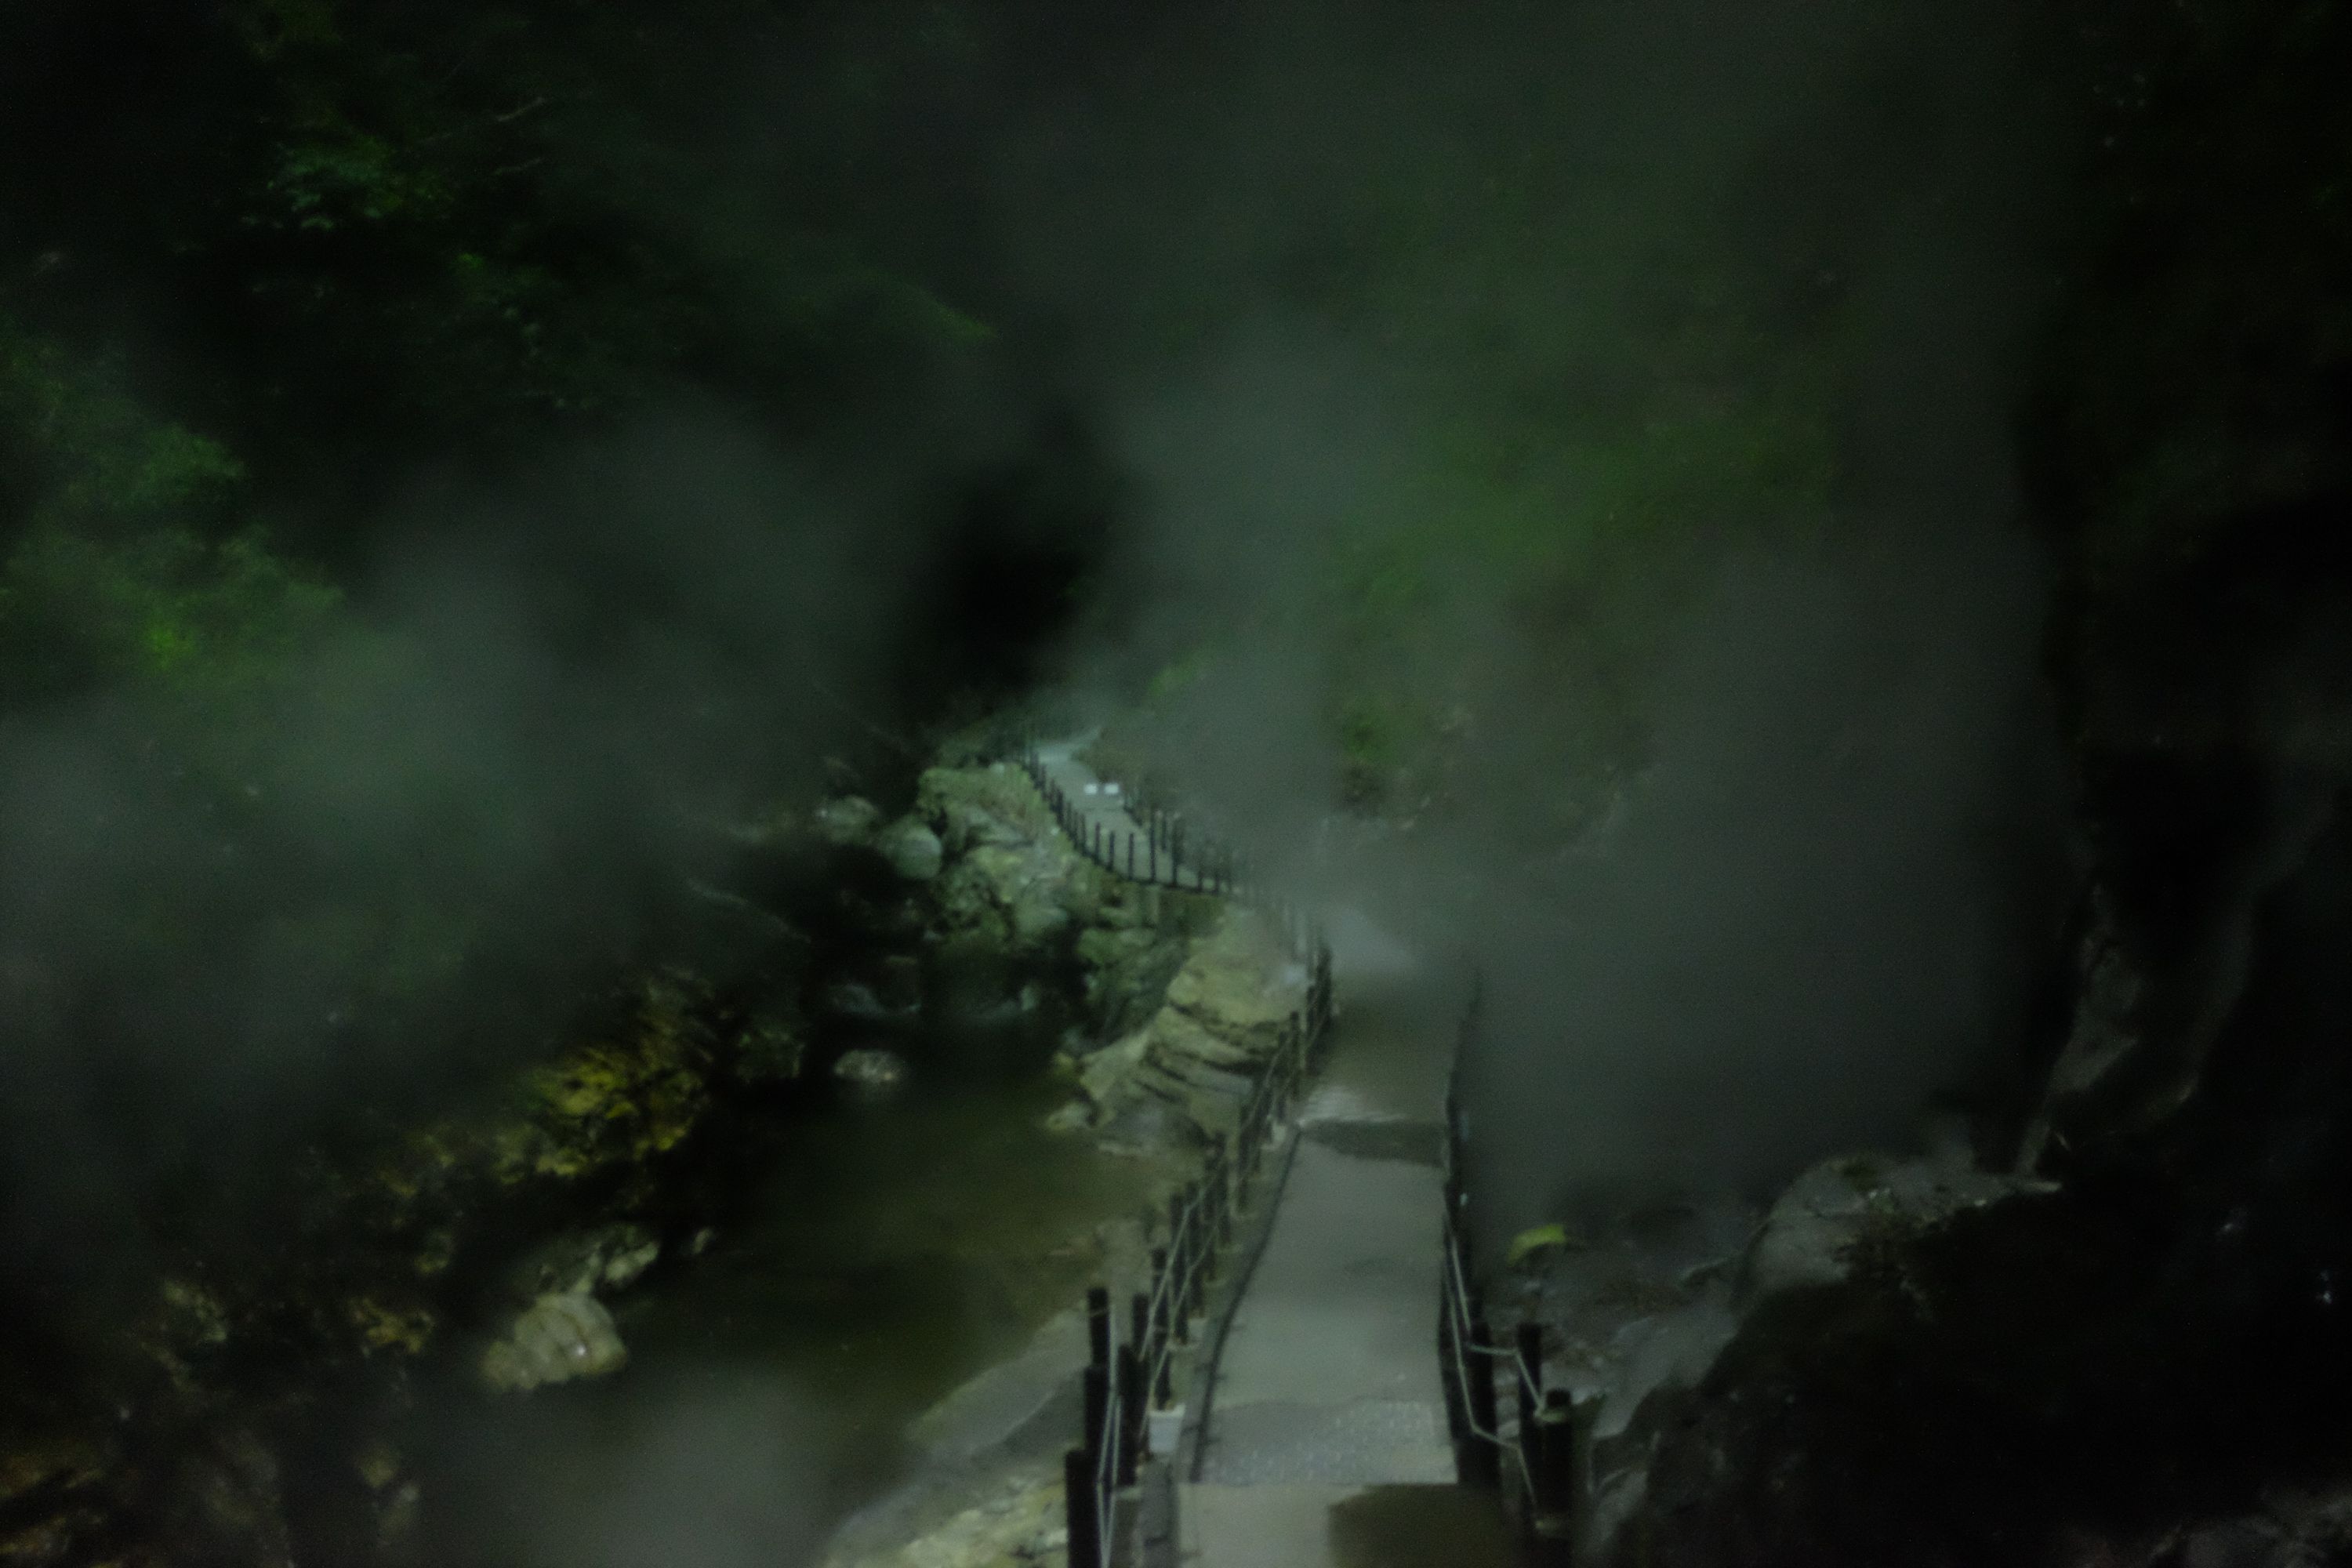 A set of steps leads into the gorge of a hot spring.